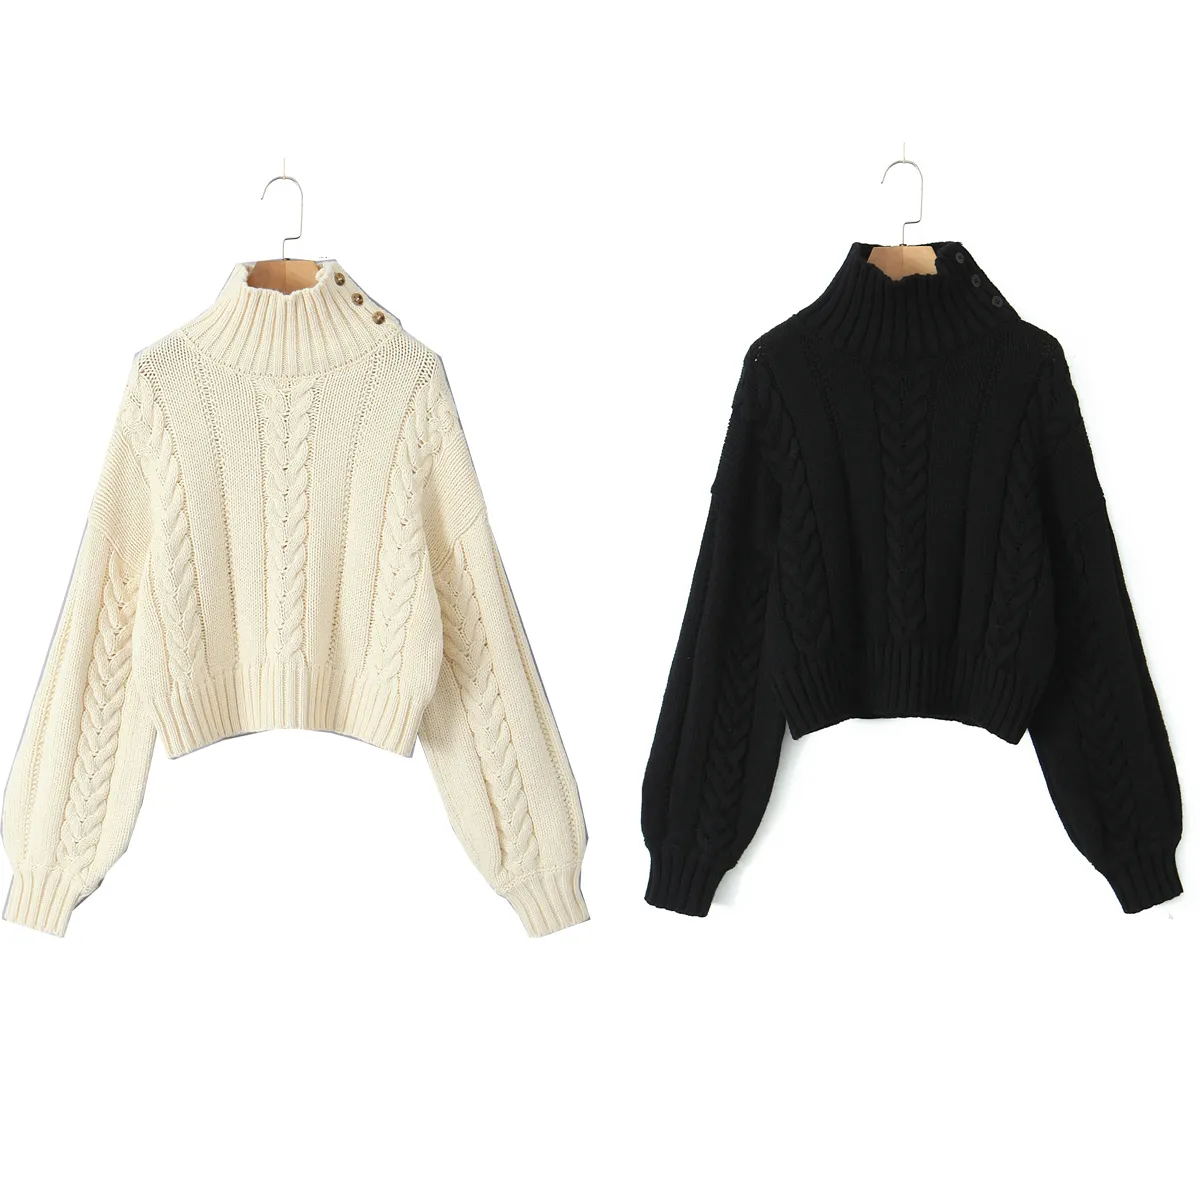 2 colorway solid color twist pattern stand collar side buttons casual fashion women's knit sweater